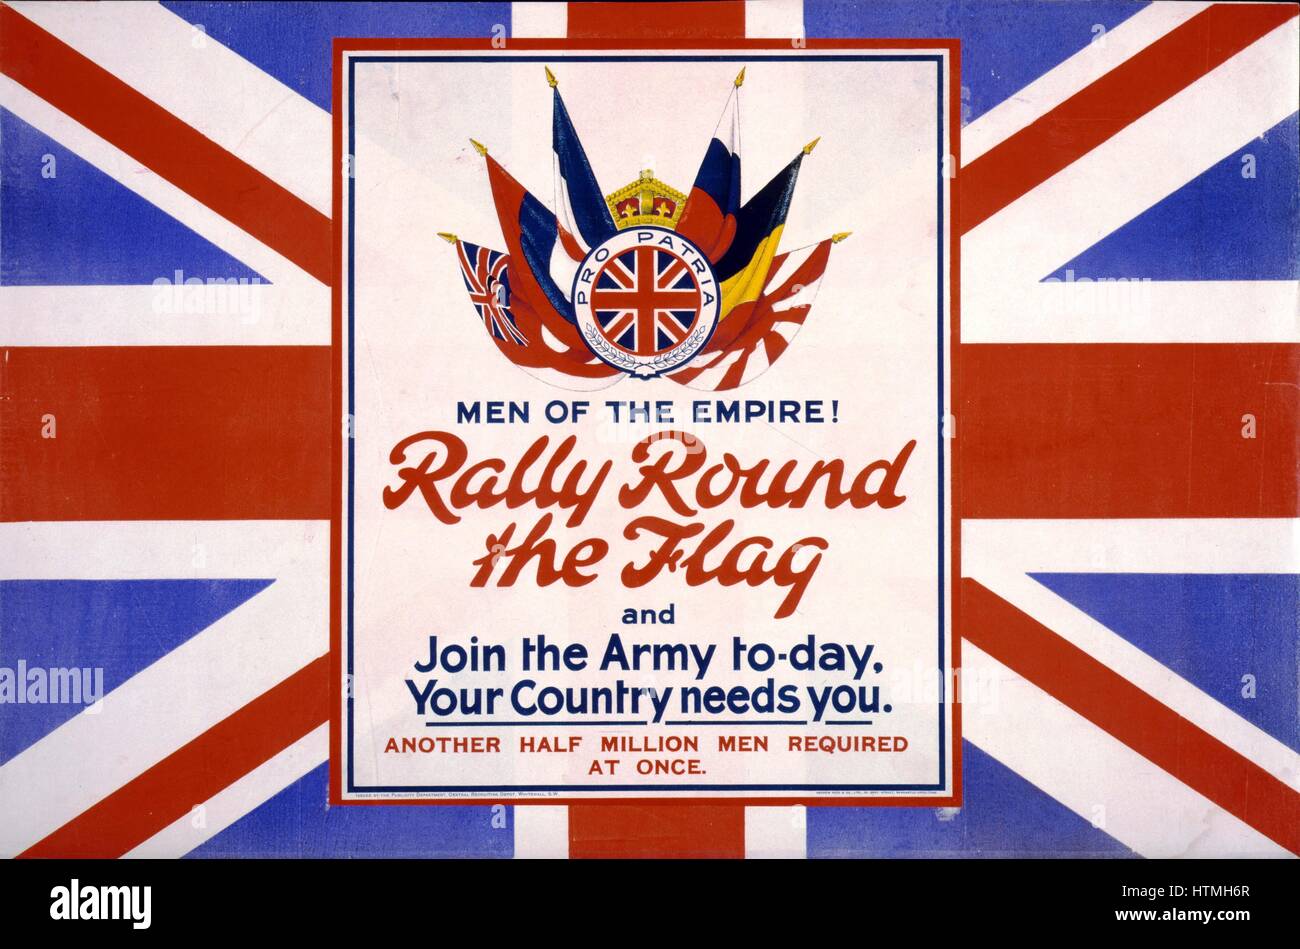 Men of the empire! Rally round the flag and join the army to-day, your country needs you. Another half million men required at once. Poster showing the flags of the Allies, against a backdrop of the British flag Stock Photo